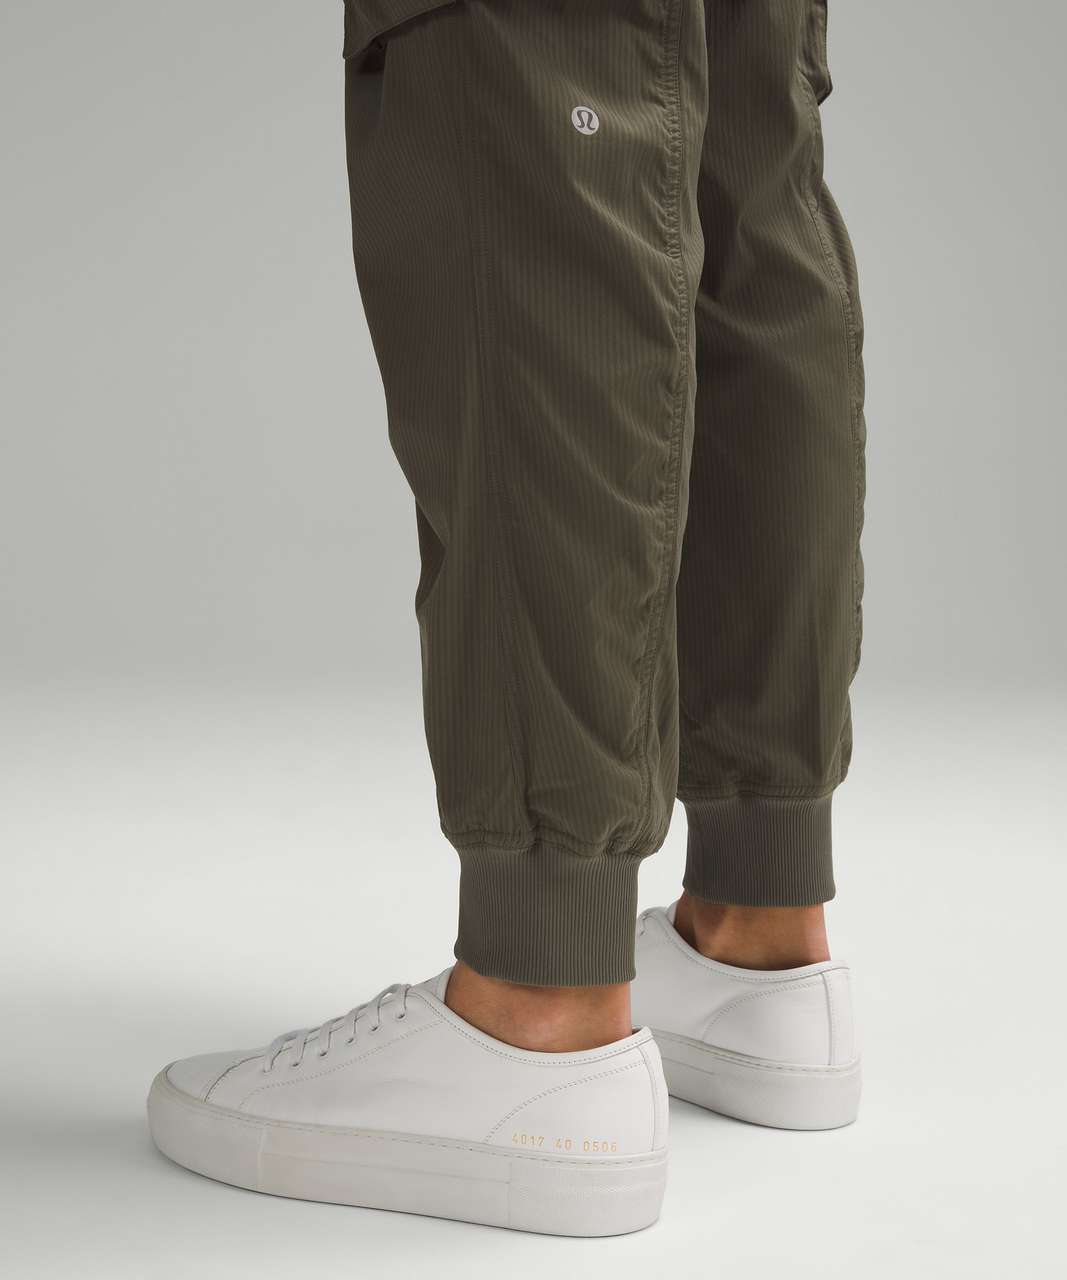 Lululemon Dance Studio Relaxed-Fit Mid-Rise Cargo Jogger - Army Green